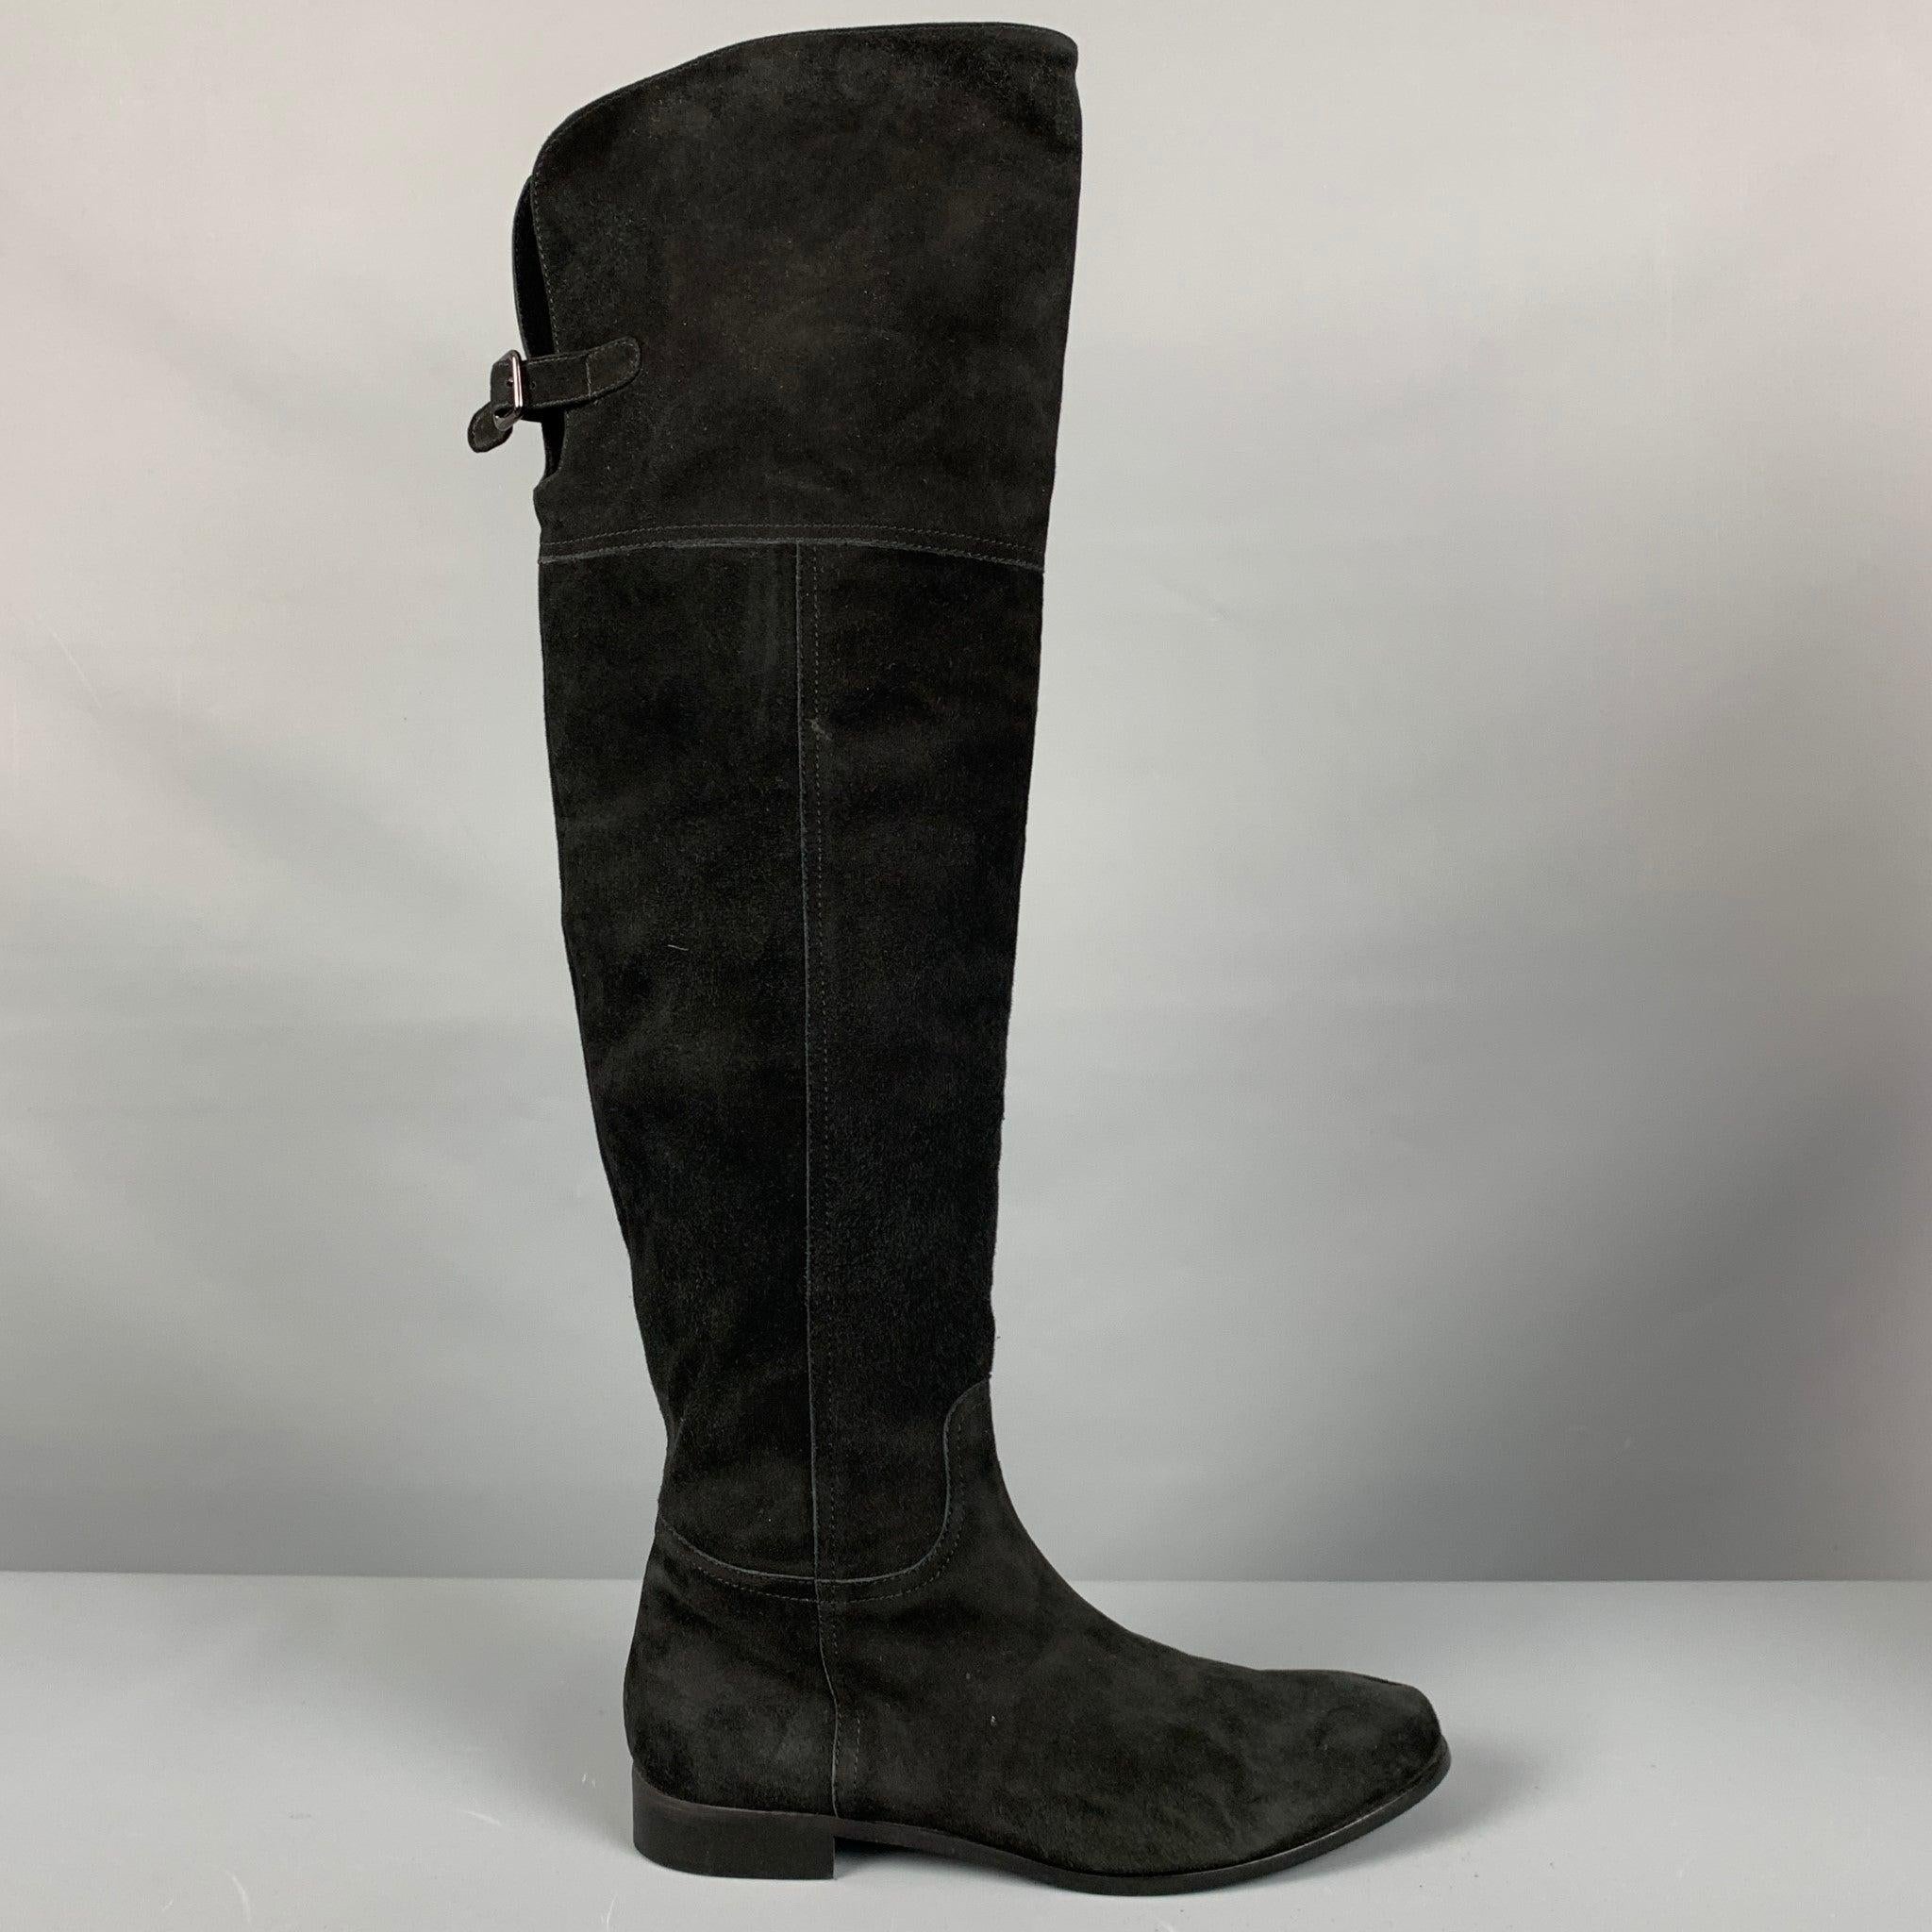 AQUATALIA
boots in a black suede featuring an over the knee style, buckle, and side zipper closure. Made in Italy.Very Good Pre-Owned Condition. Moderate signs of wear. 

Marked:   9.5 

Measurements: 
  Length: 11 inches Width: 3.5 inches Height: